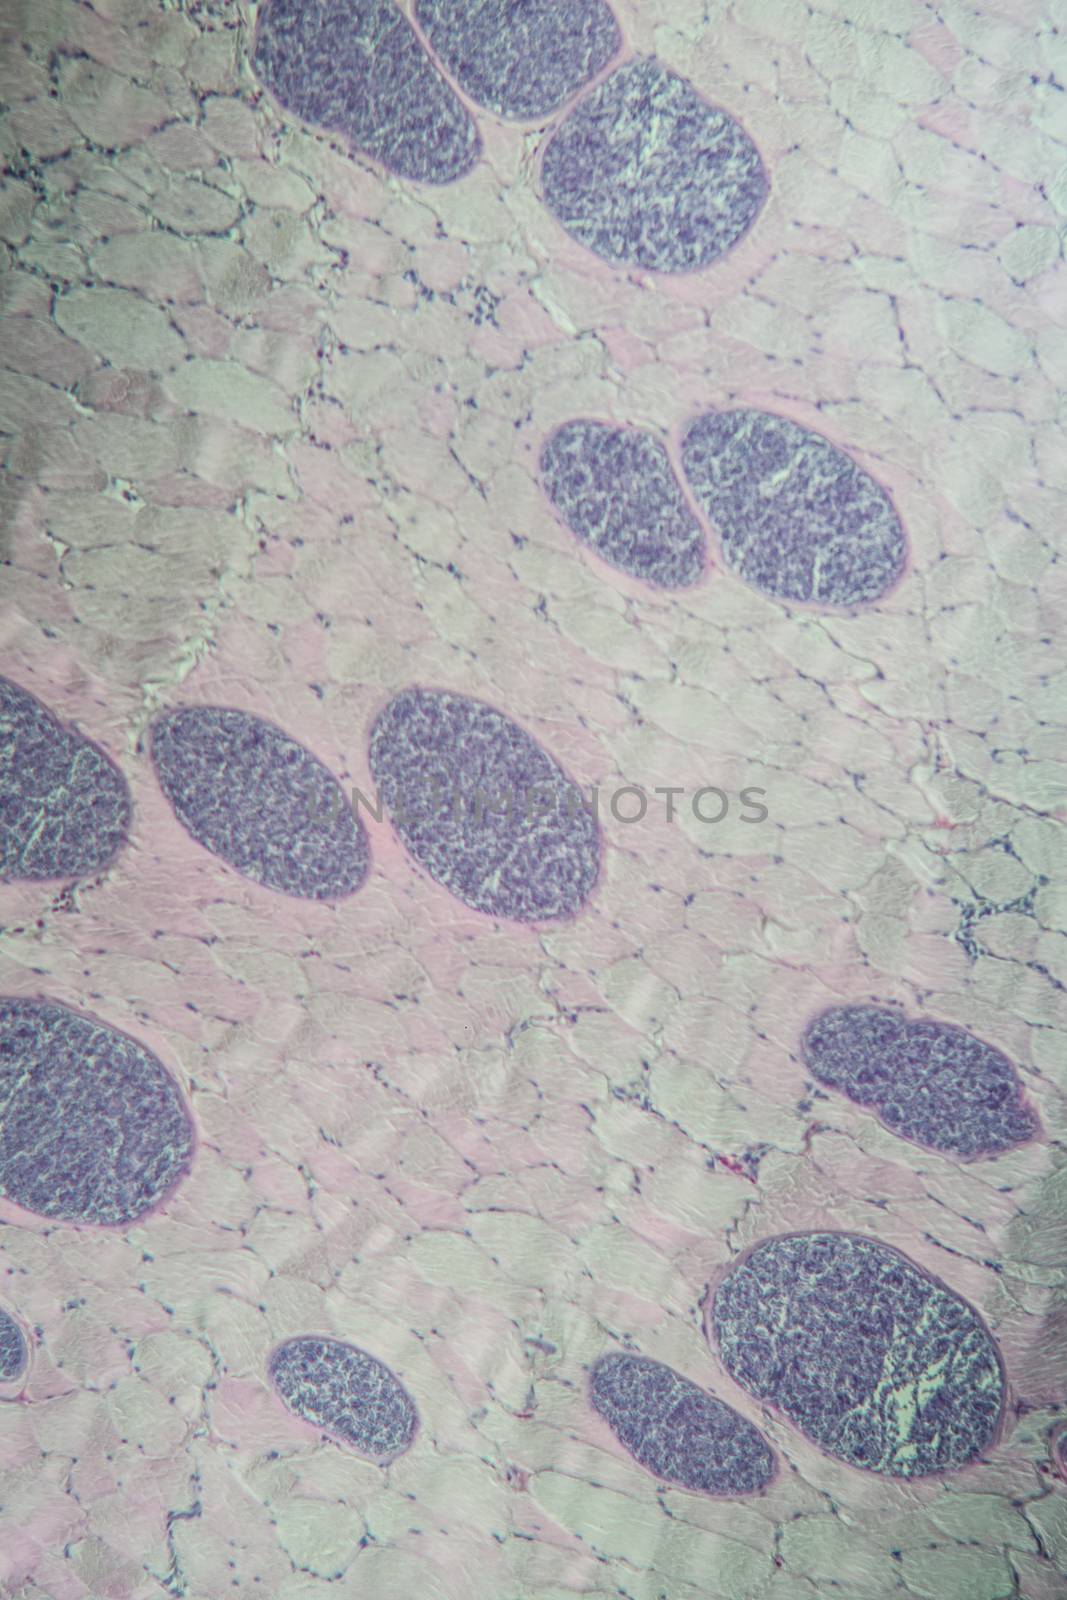 Sarcocystis spore animals in muscle, 100x by Dr-Lange